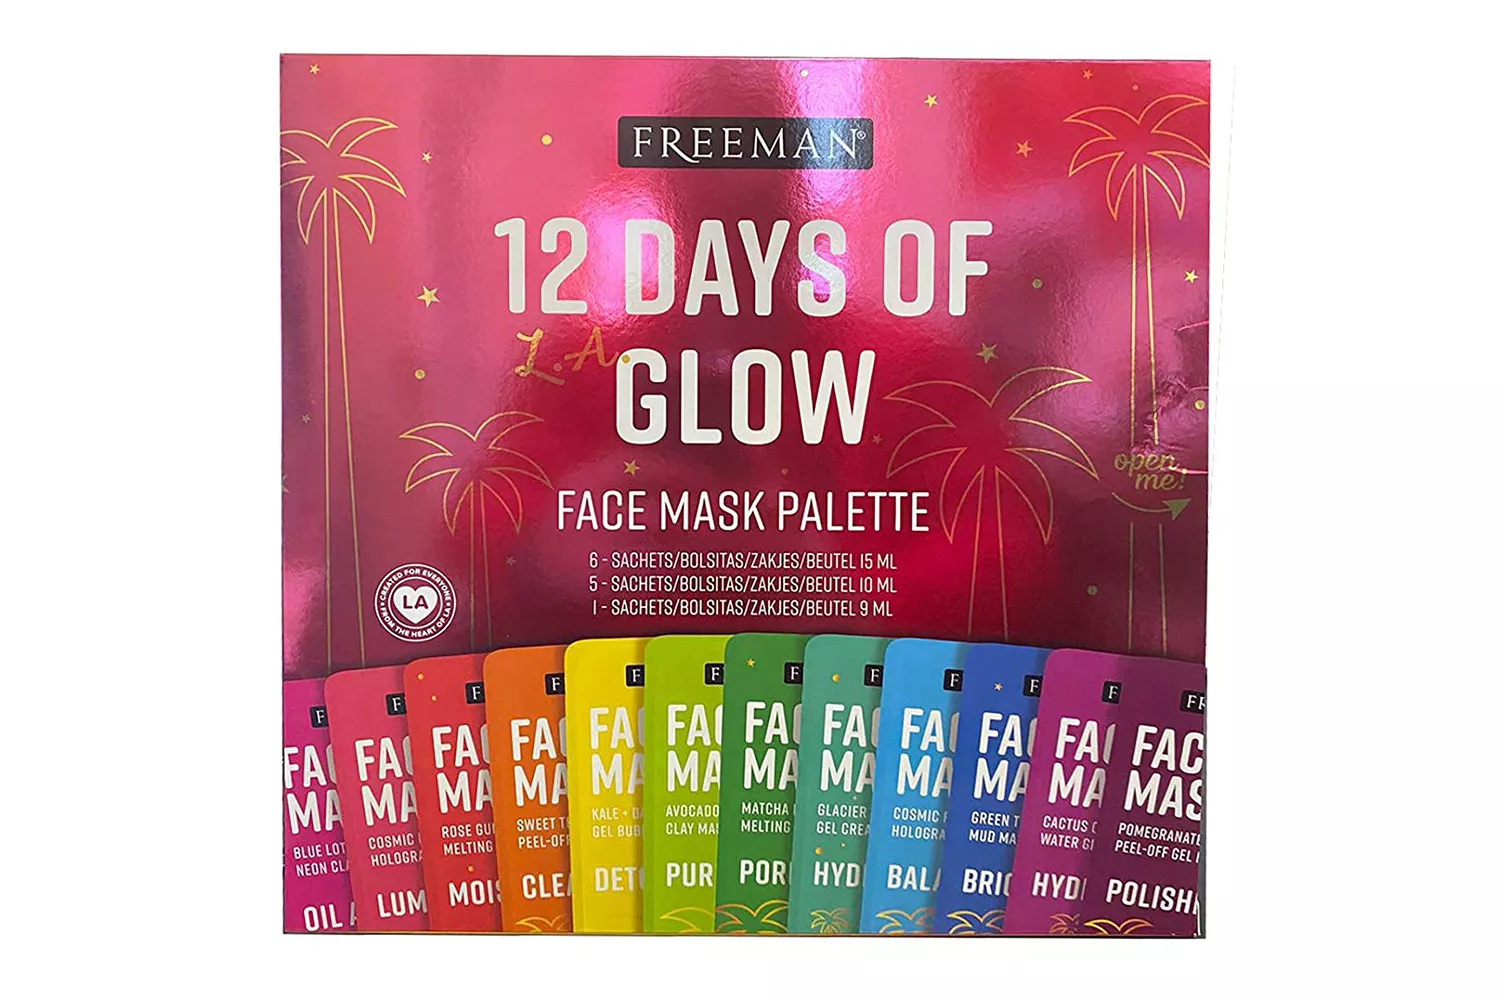 Freeman 12 Days of Glow Face Mask Palette